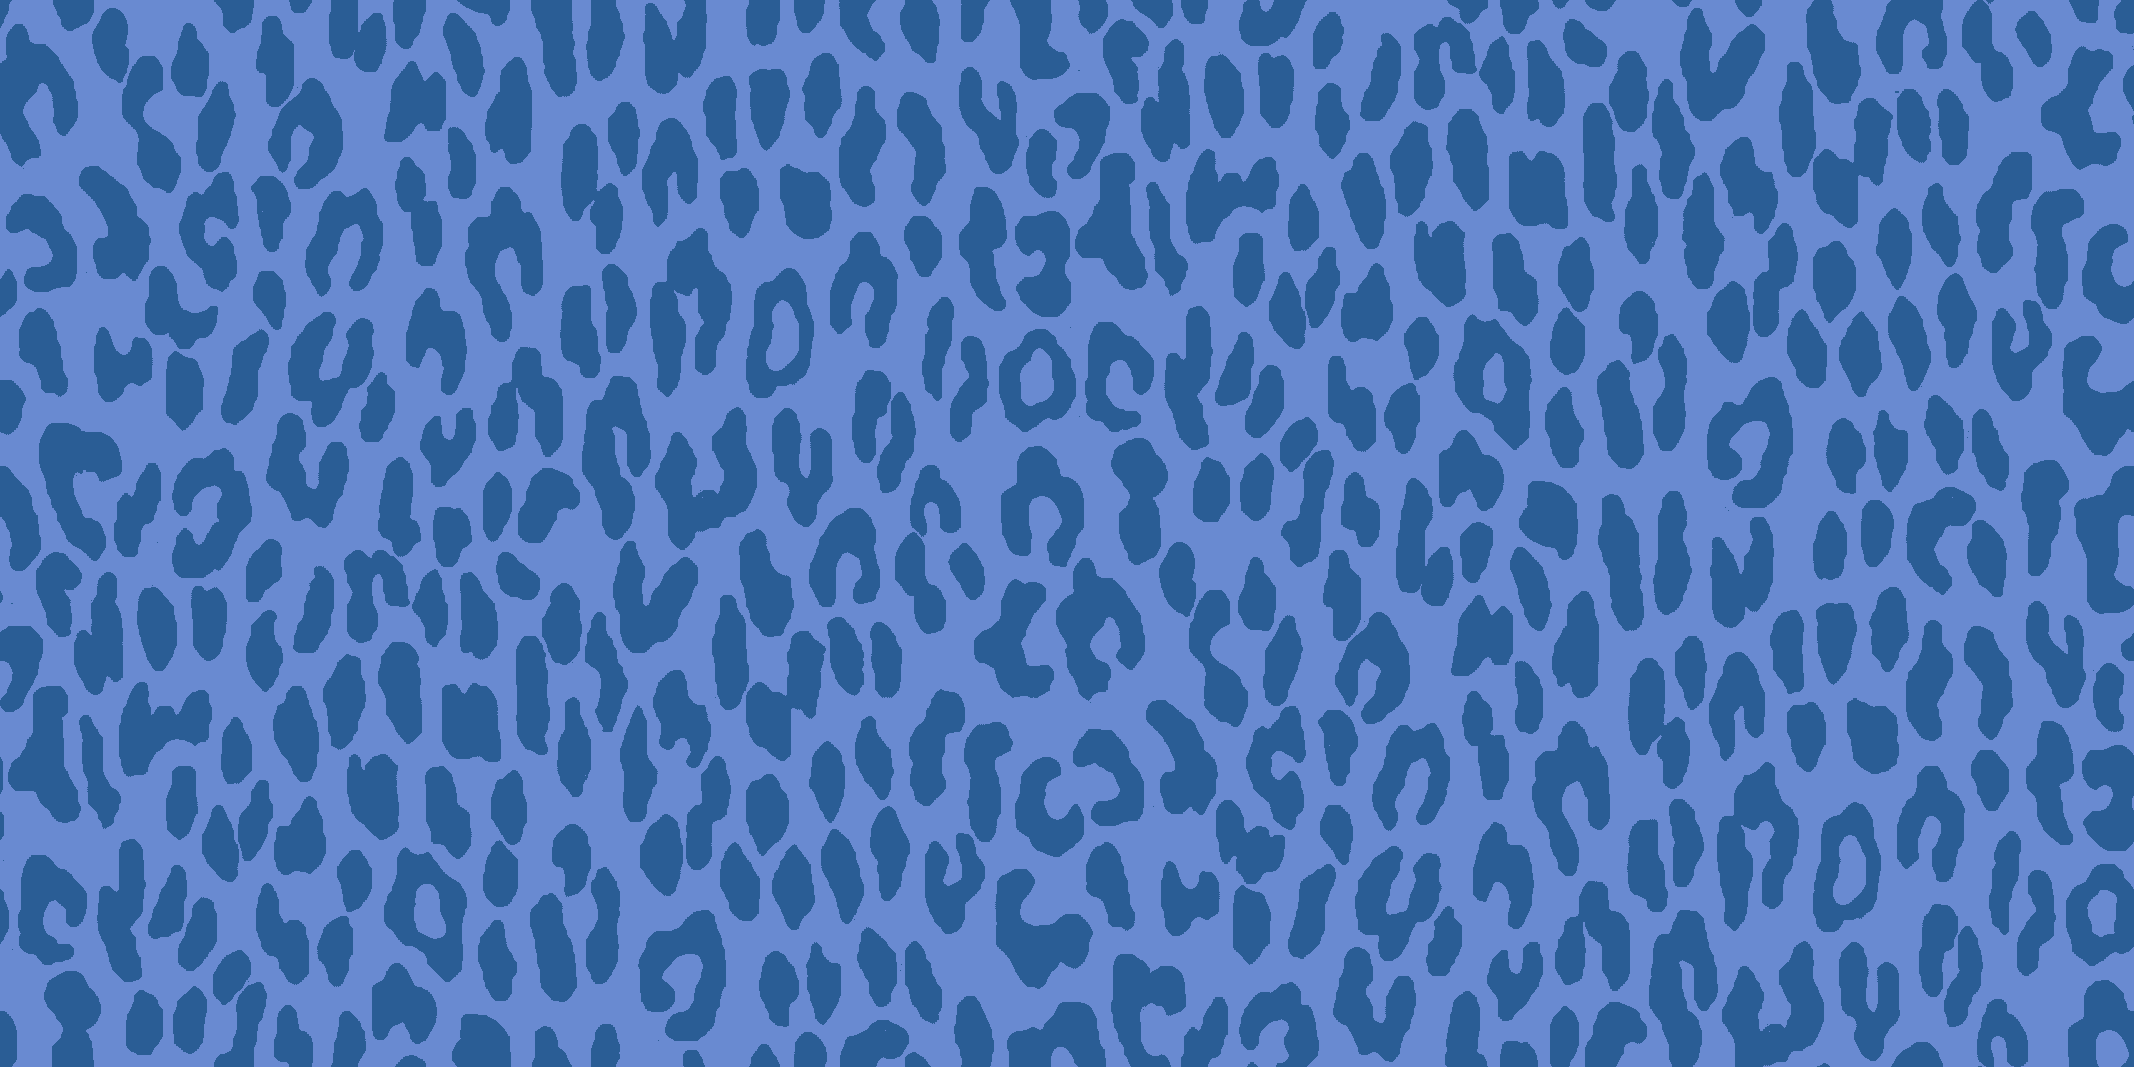 Waverly Inspirations 44" 100% Cotton Wild Spots Sewing & Craft Fabric By the Yard, Lapis